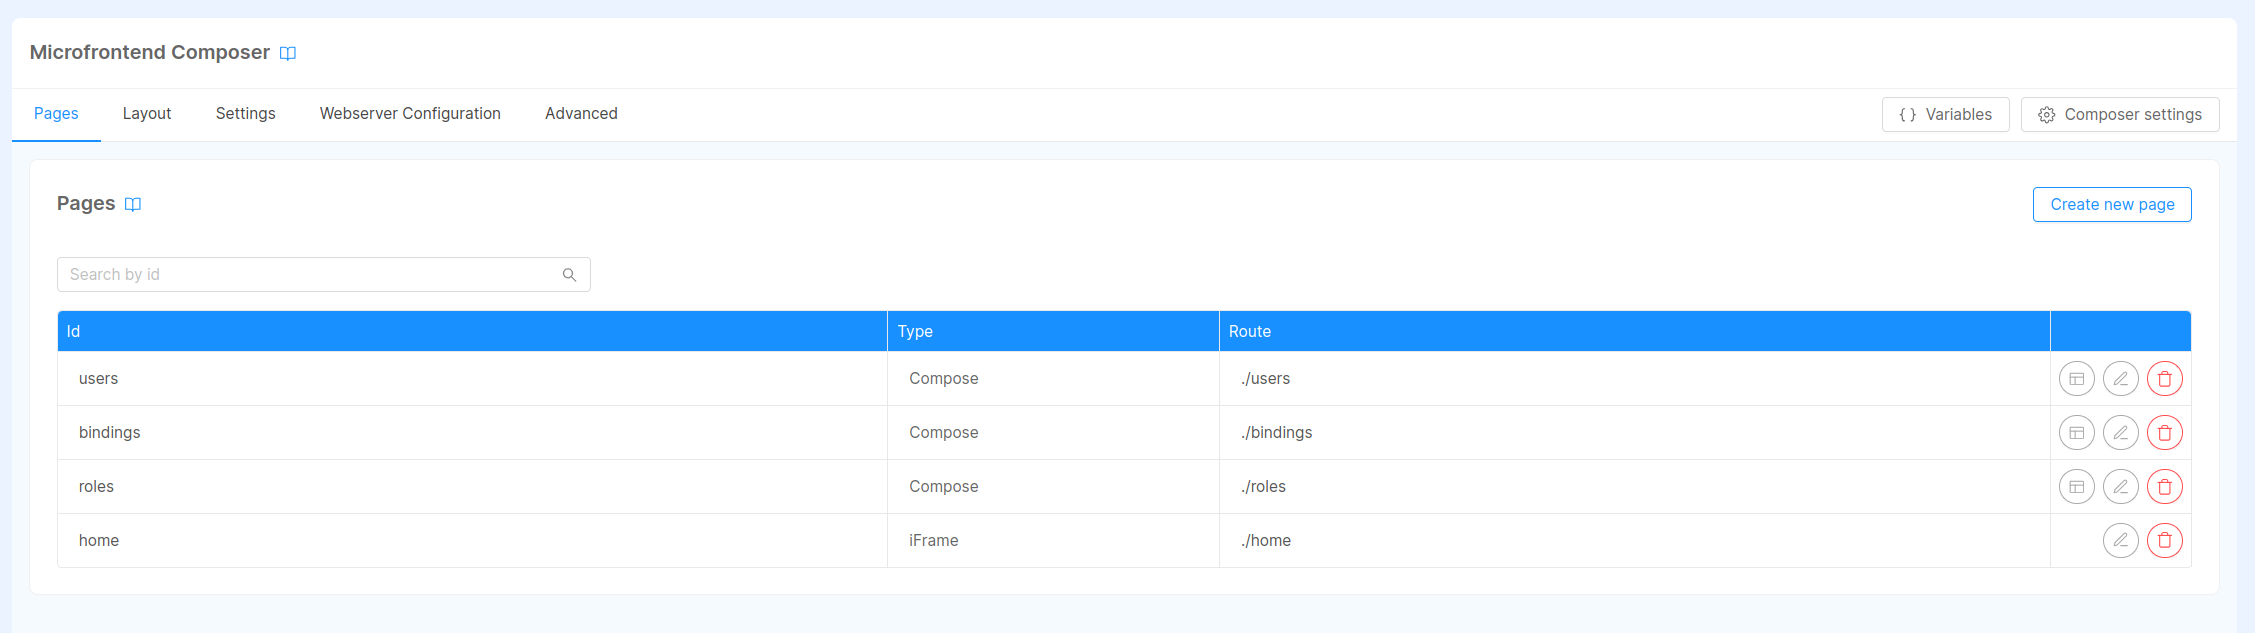 Screenshot of Microfrontend Composer homepage